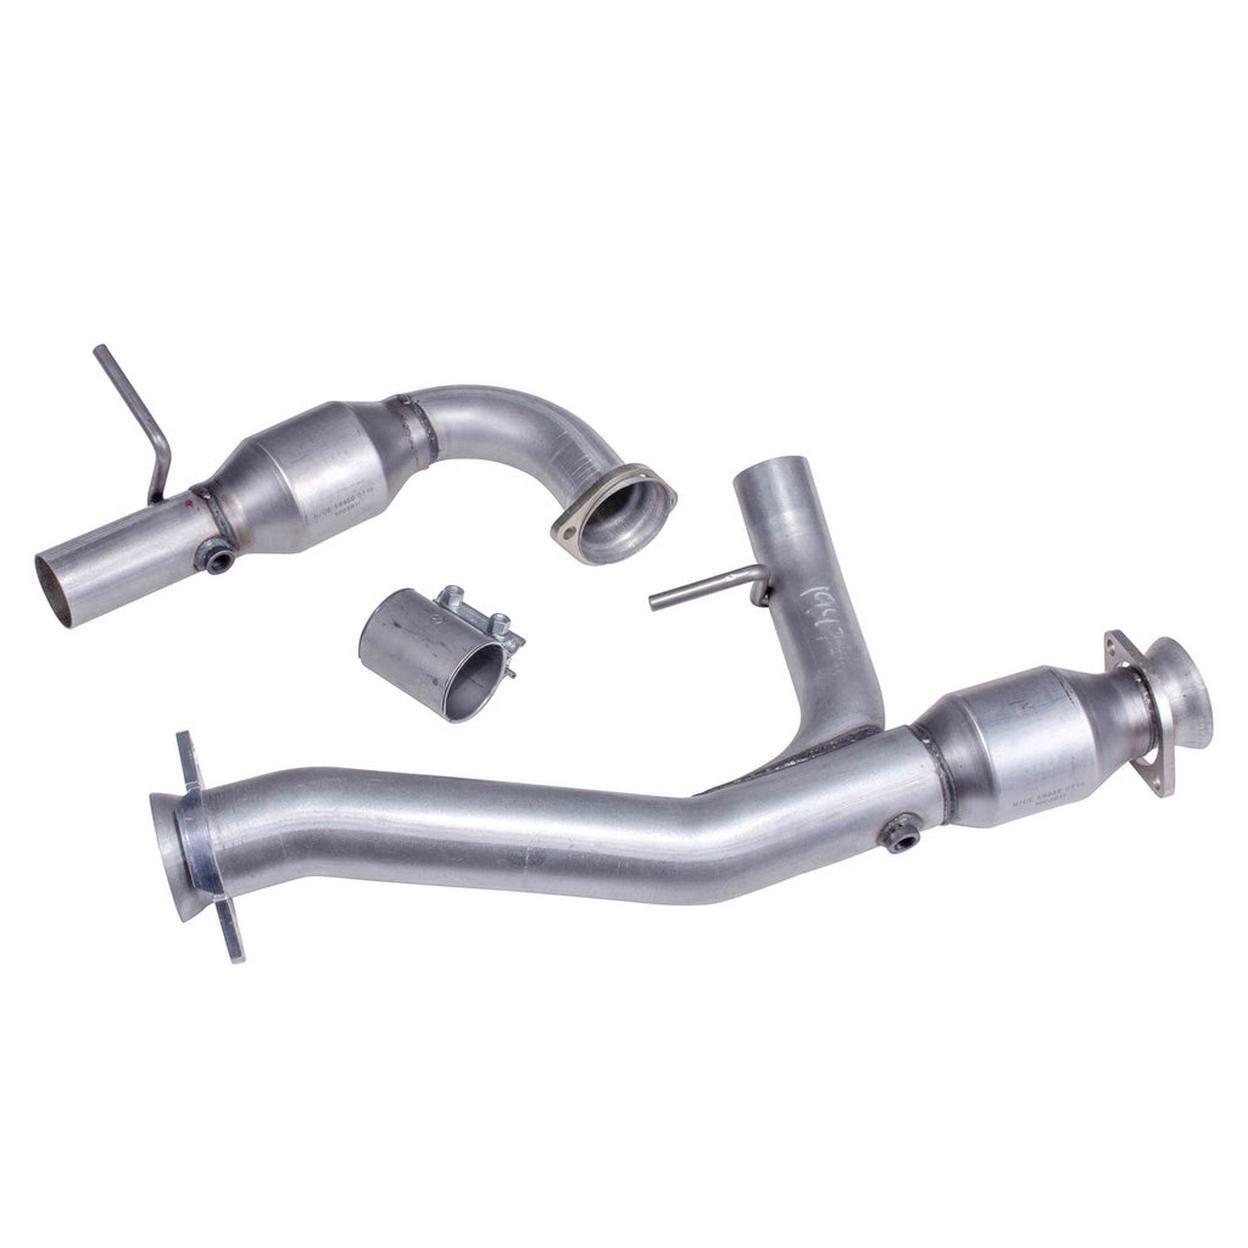 Exhaust Pipe for 2003 Ford F-150 Lightning Supercharged 5.4L V8 GAS SOHC